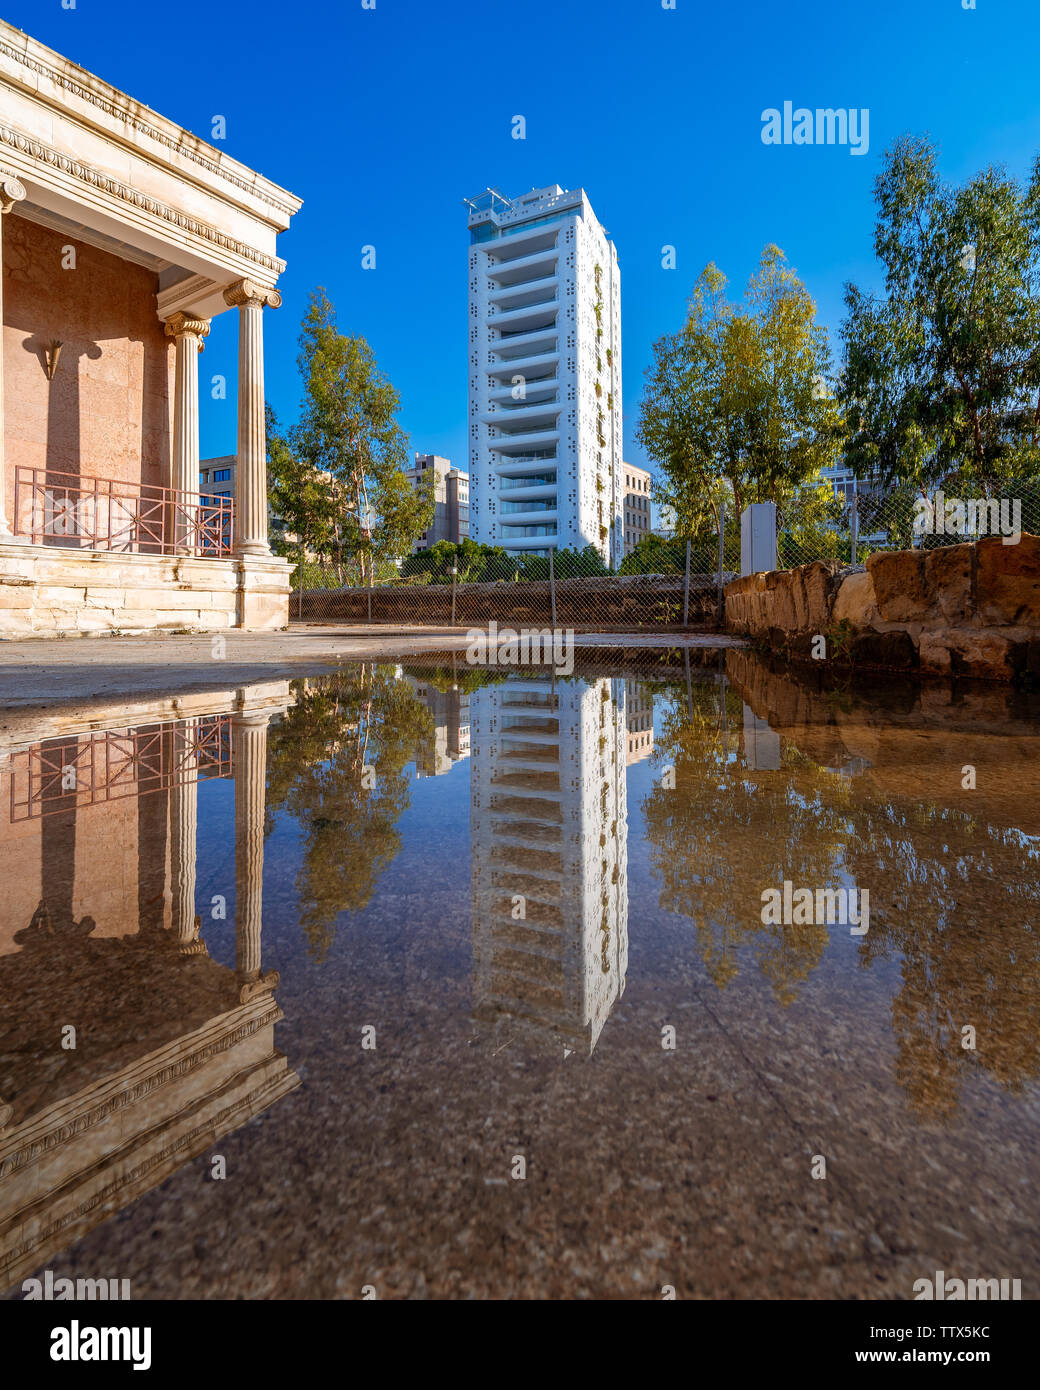 Modern and old architecture in Nicosia, capital of Cyprus Stock Photo